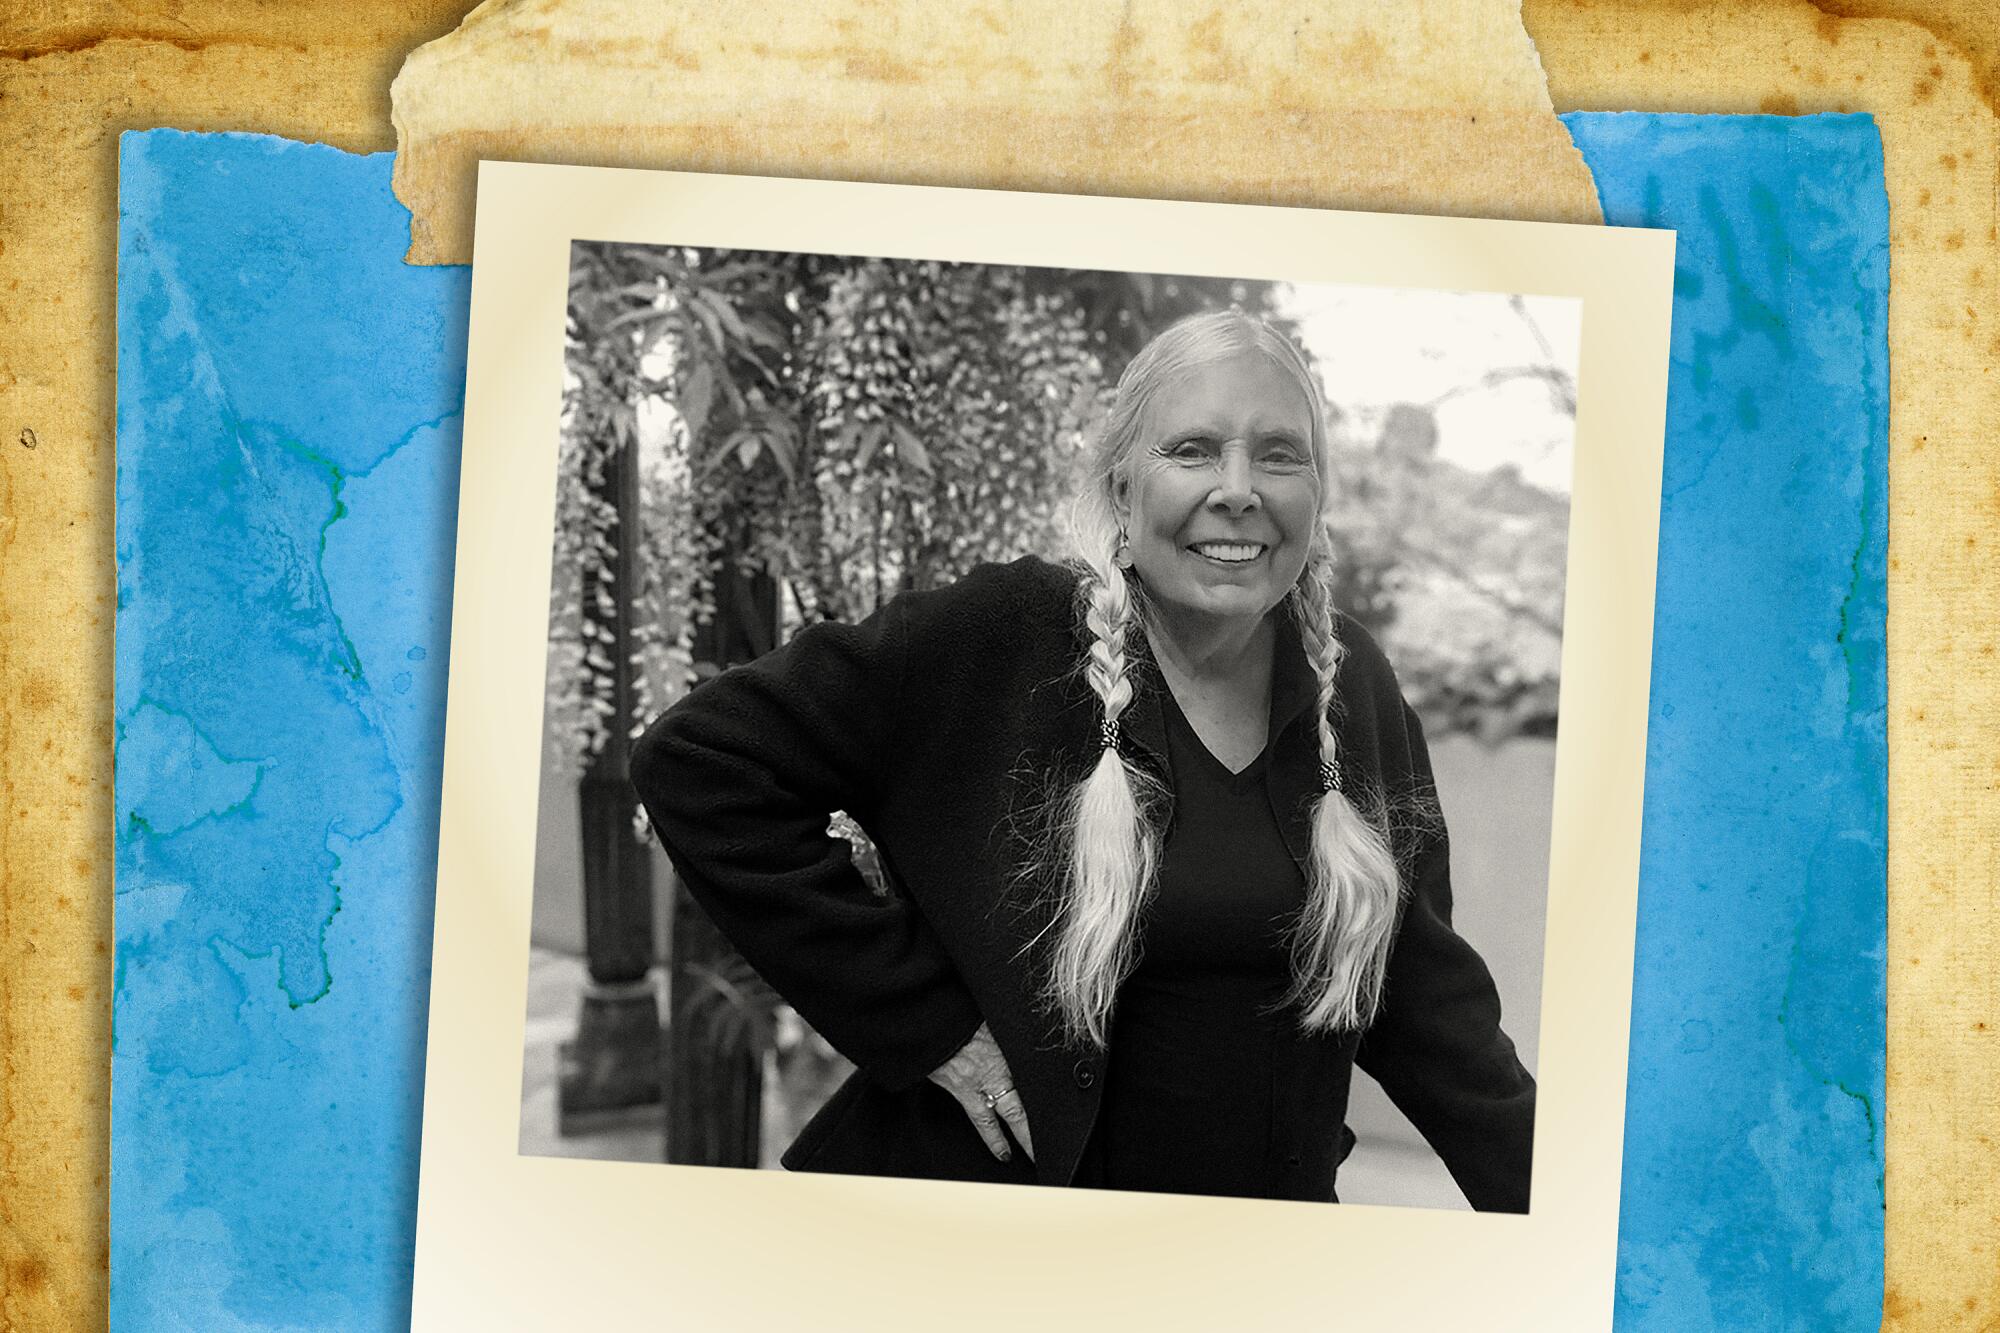 Photo illustration of Joni Mitchell, smiling with her hair in two braids